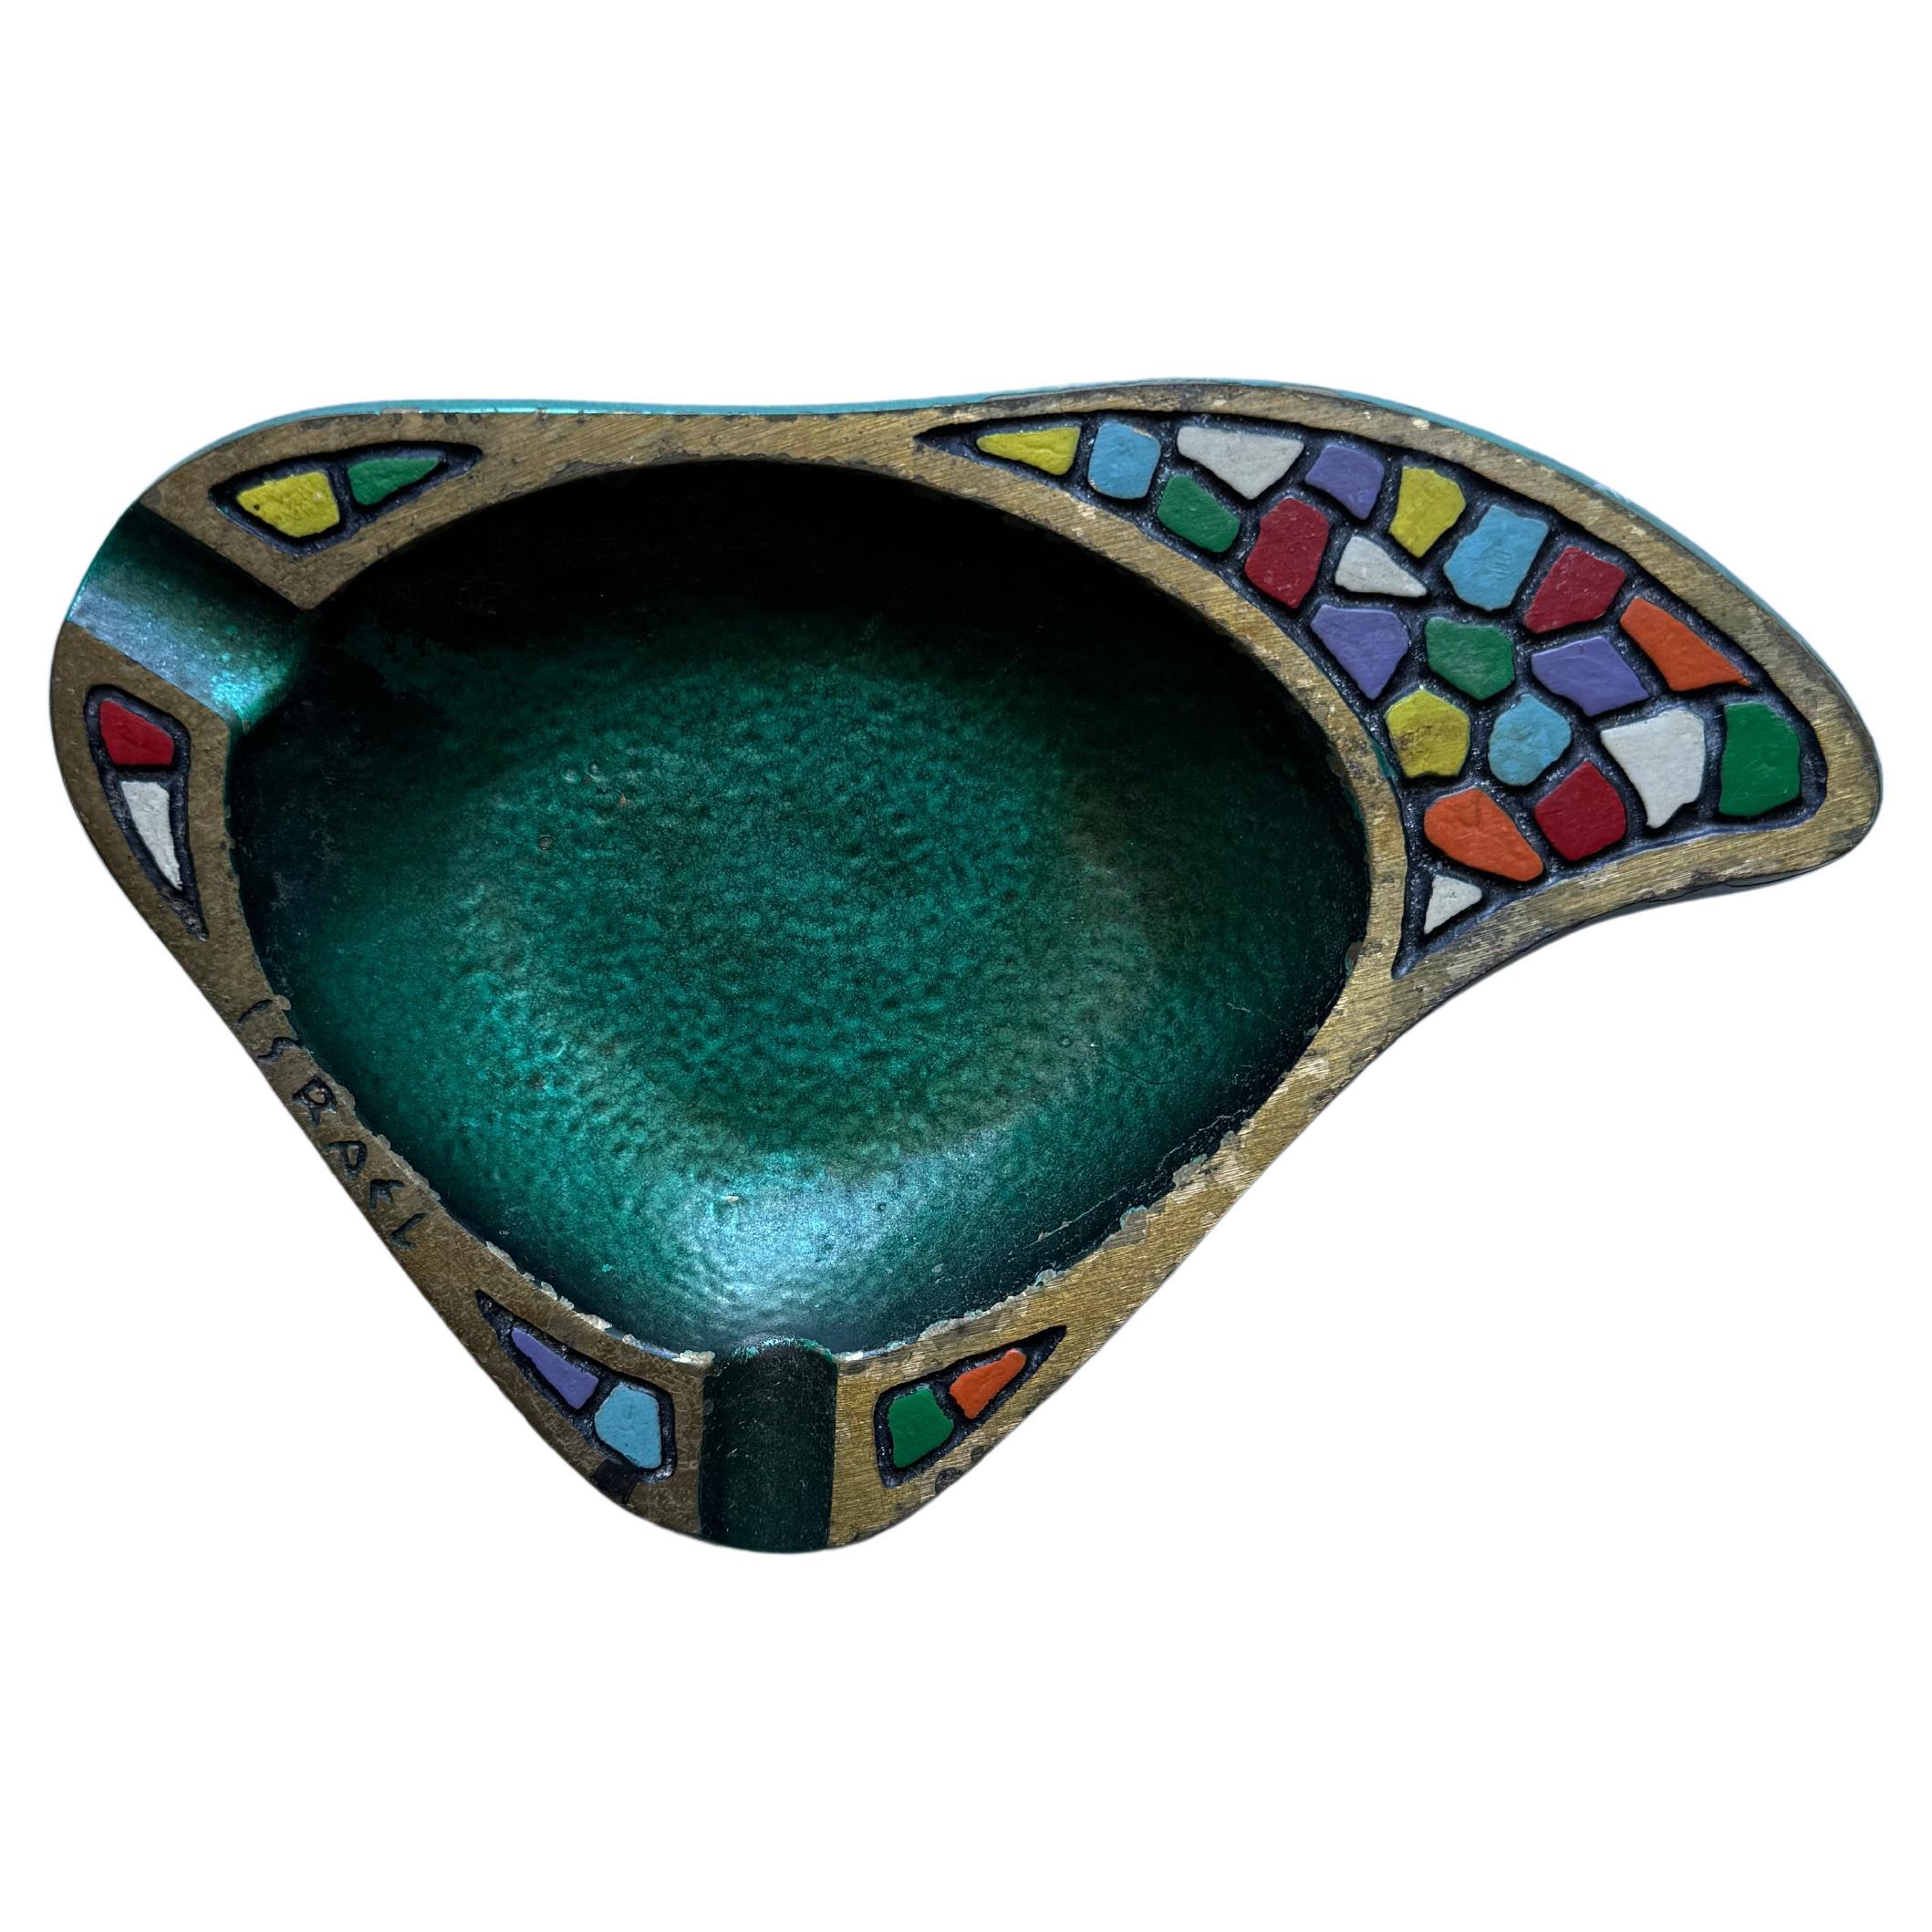 Solid Brass Hand Painted Ashtray By Dayagi, Israel 1960s For Sale